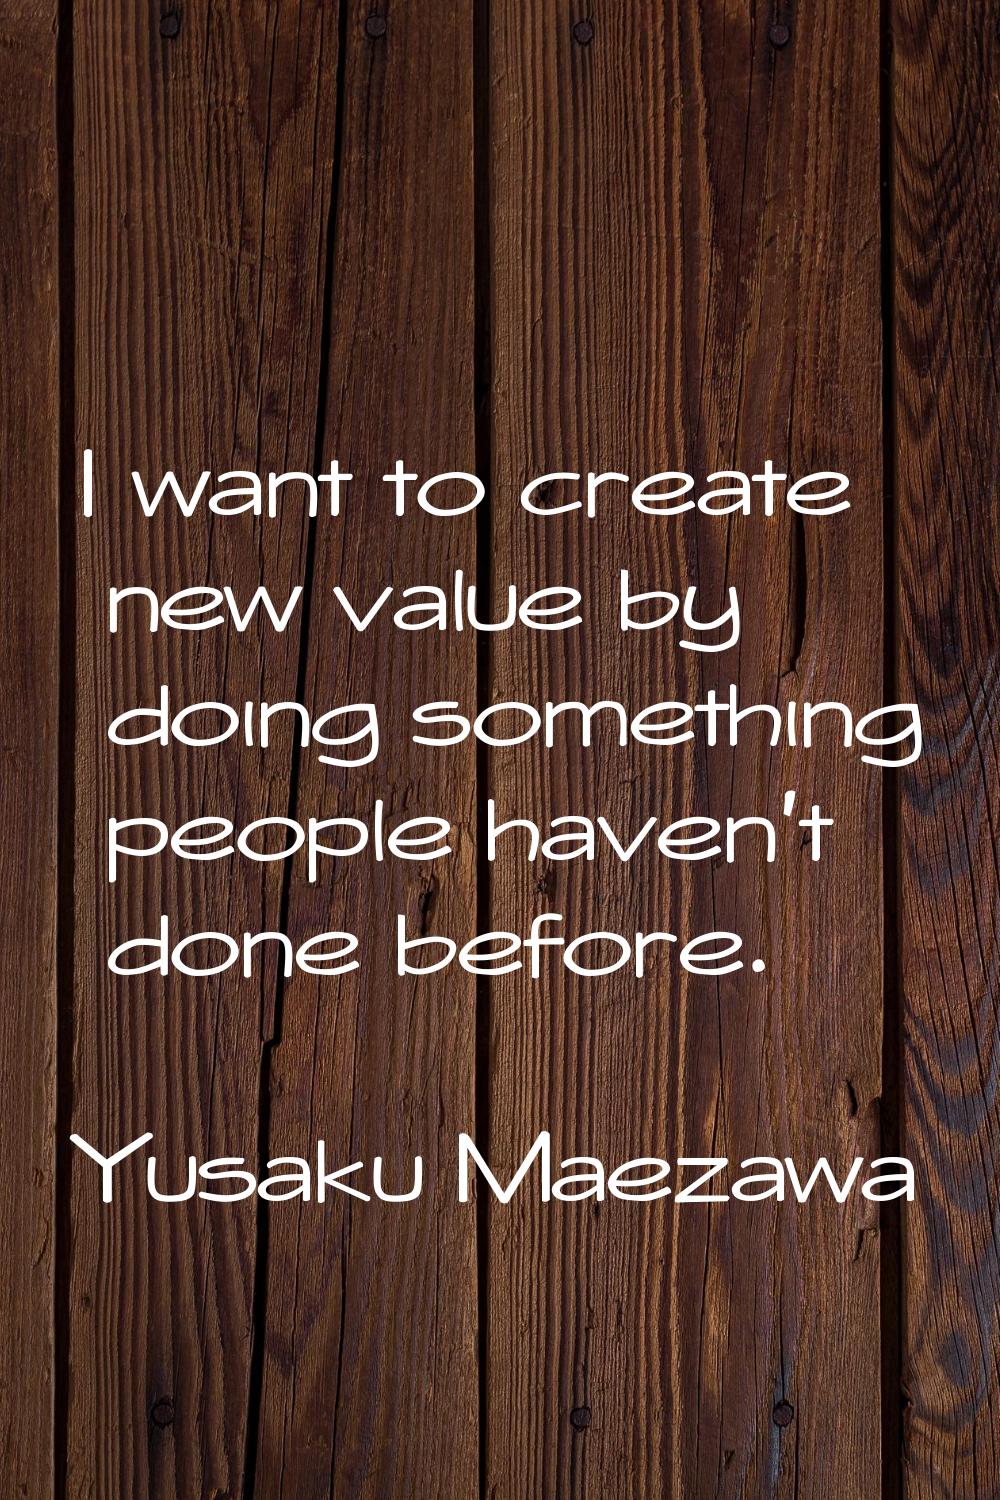 I want to create new value by doing something people haven't done before.